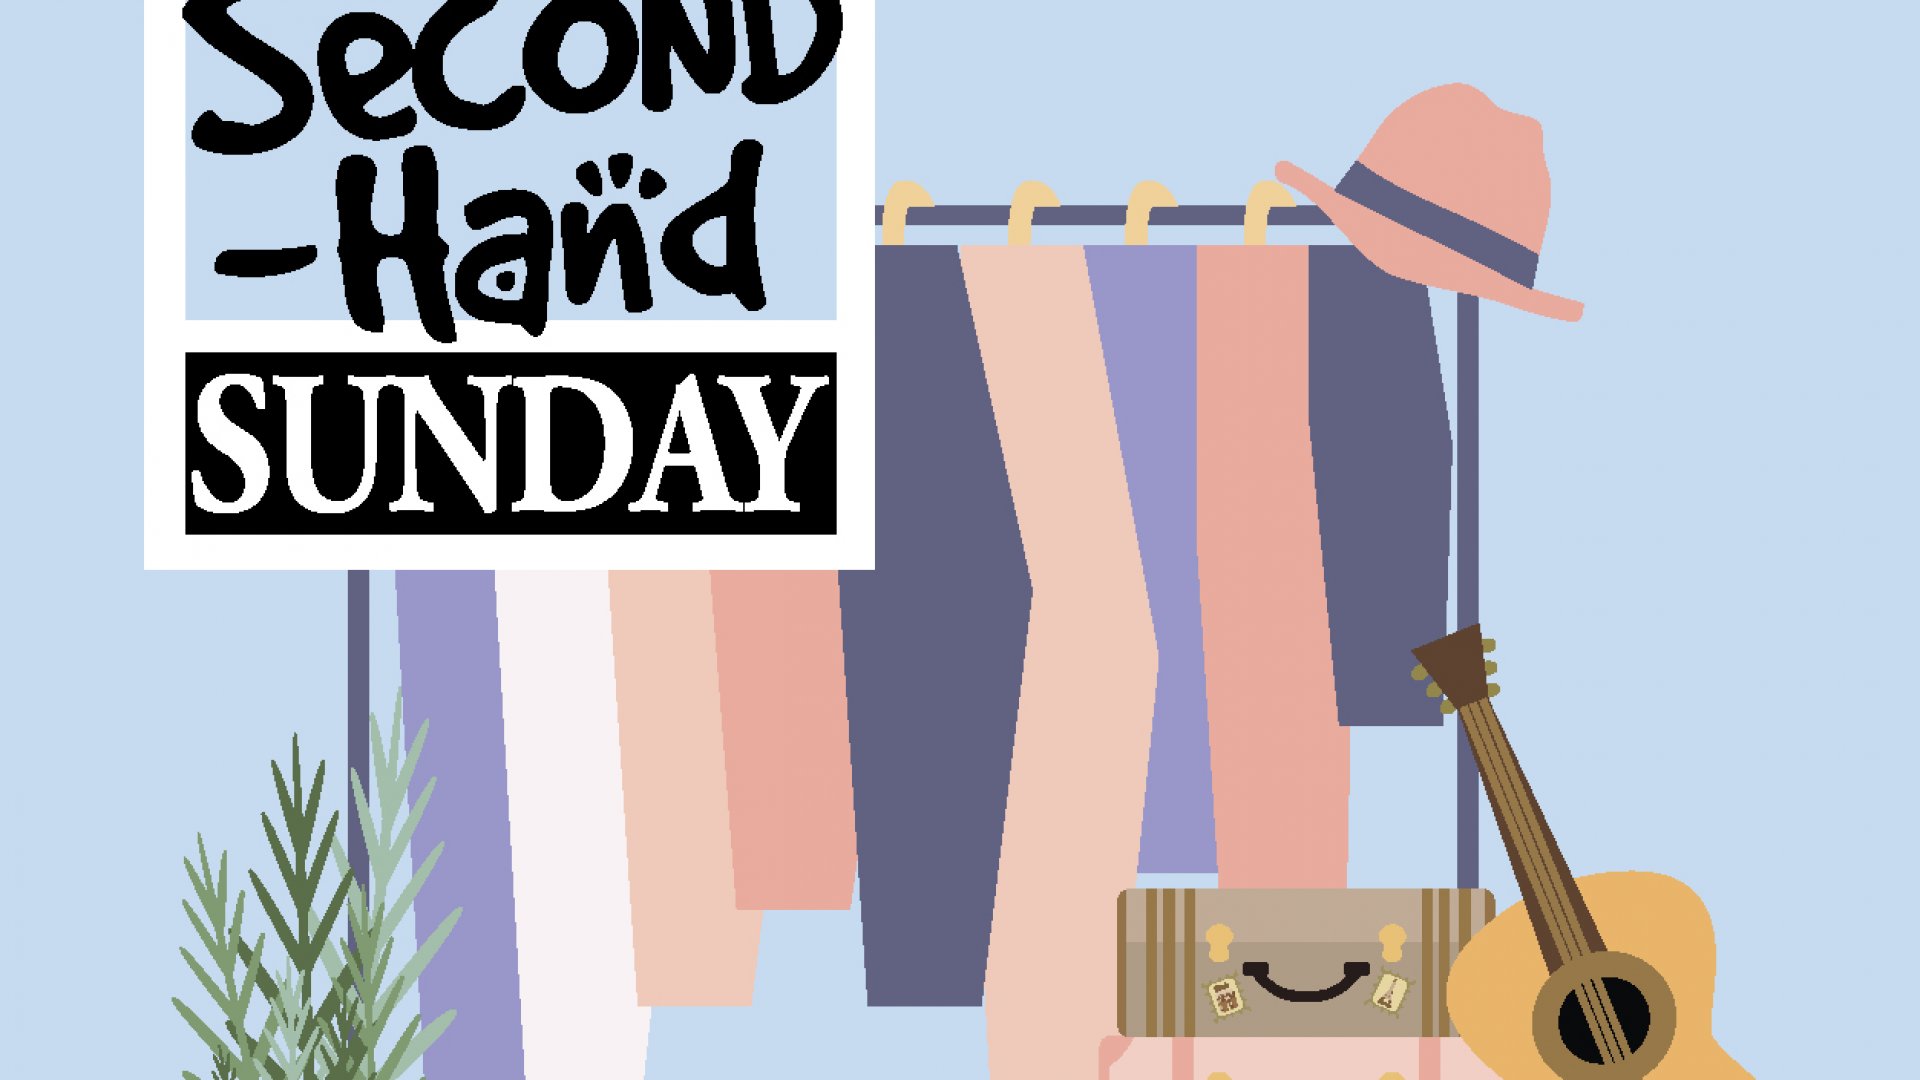 Second Hand Sunday a chance to declutter in Nelson/Tasman after